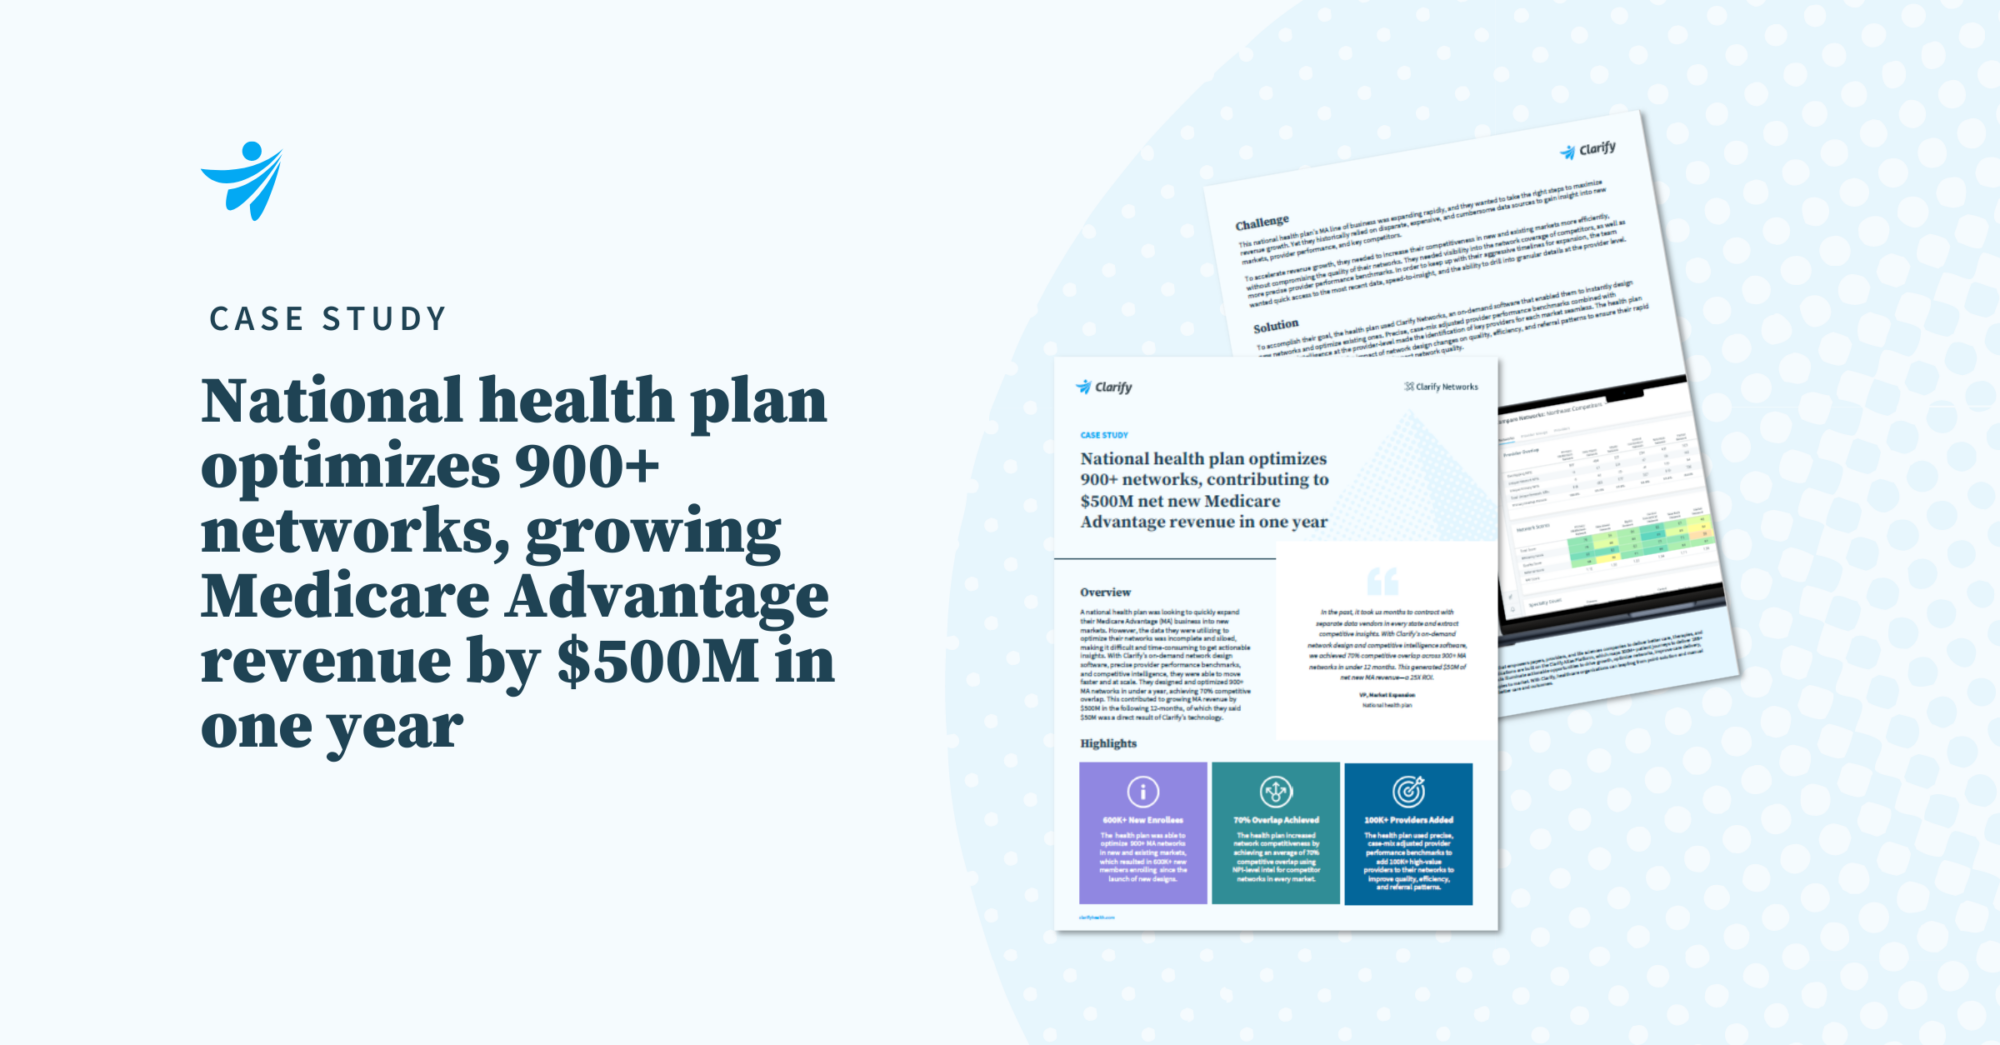 Thumbnail for National health plan optimizes 900+ networks, contributing to $500M net new Medicare Advantage revenue in one year